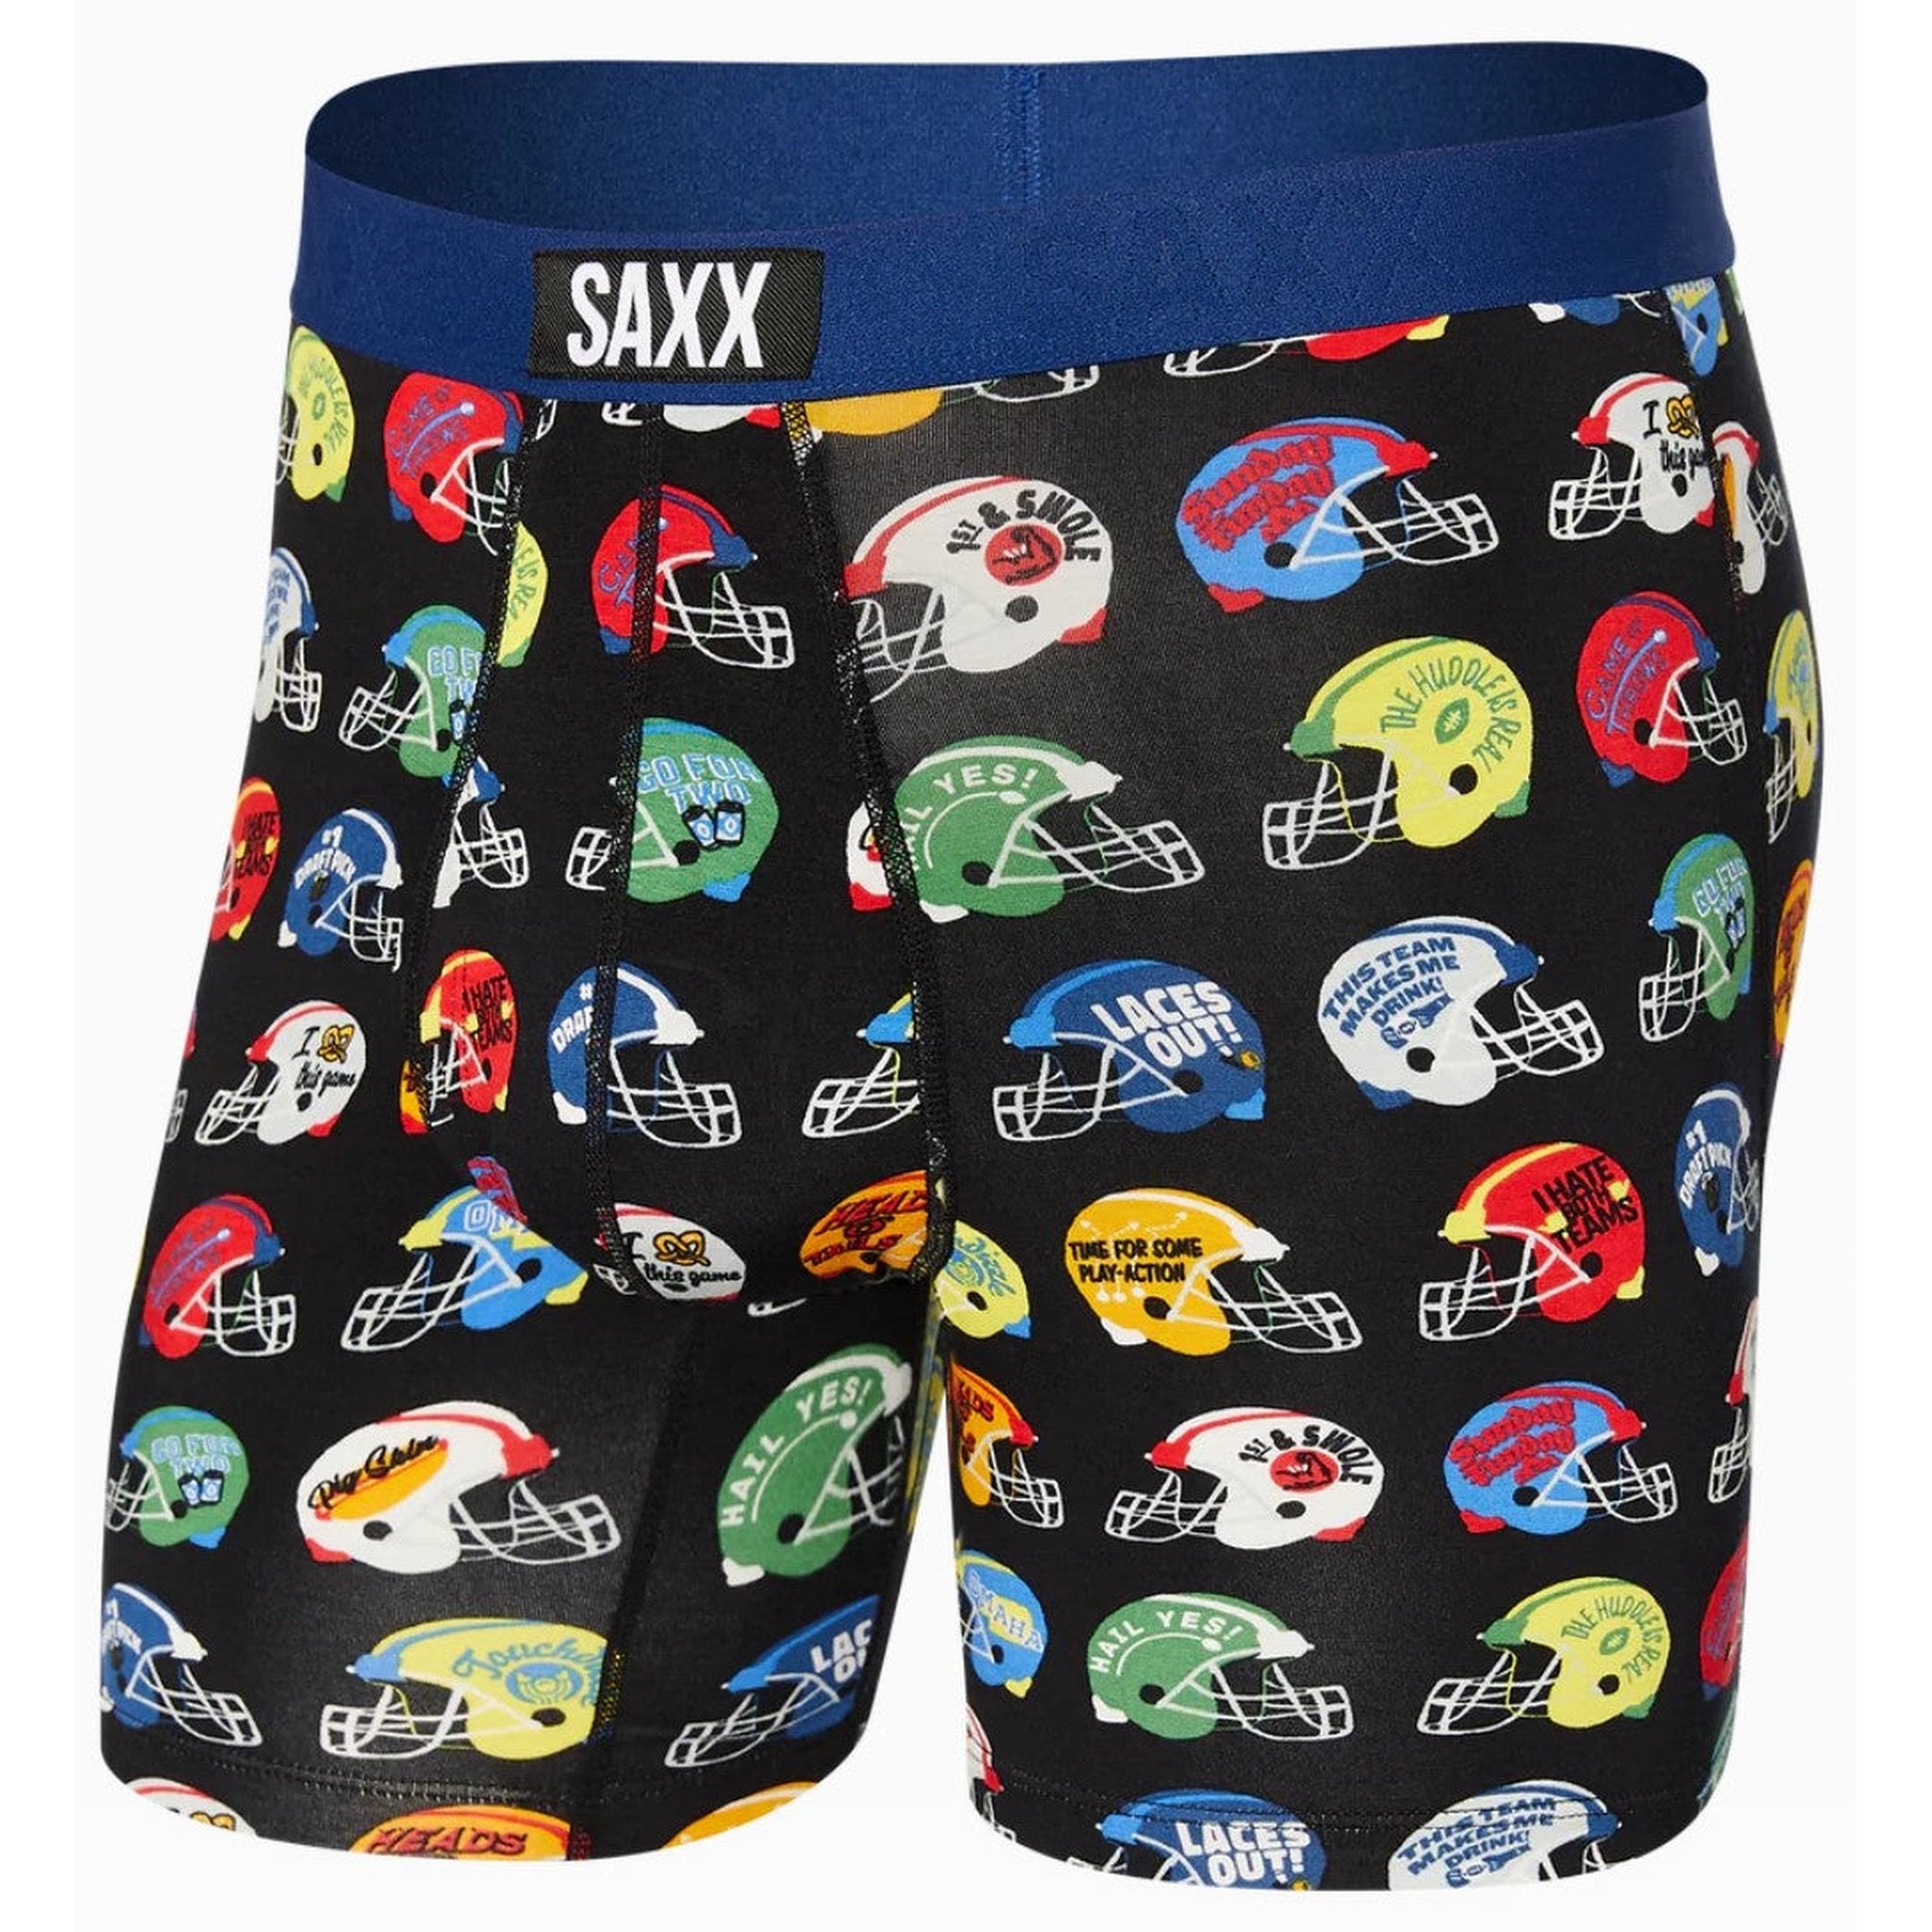 Saxx Ultra Super Soft Men's Boxer Brief with Colorful Football Helmet Print